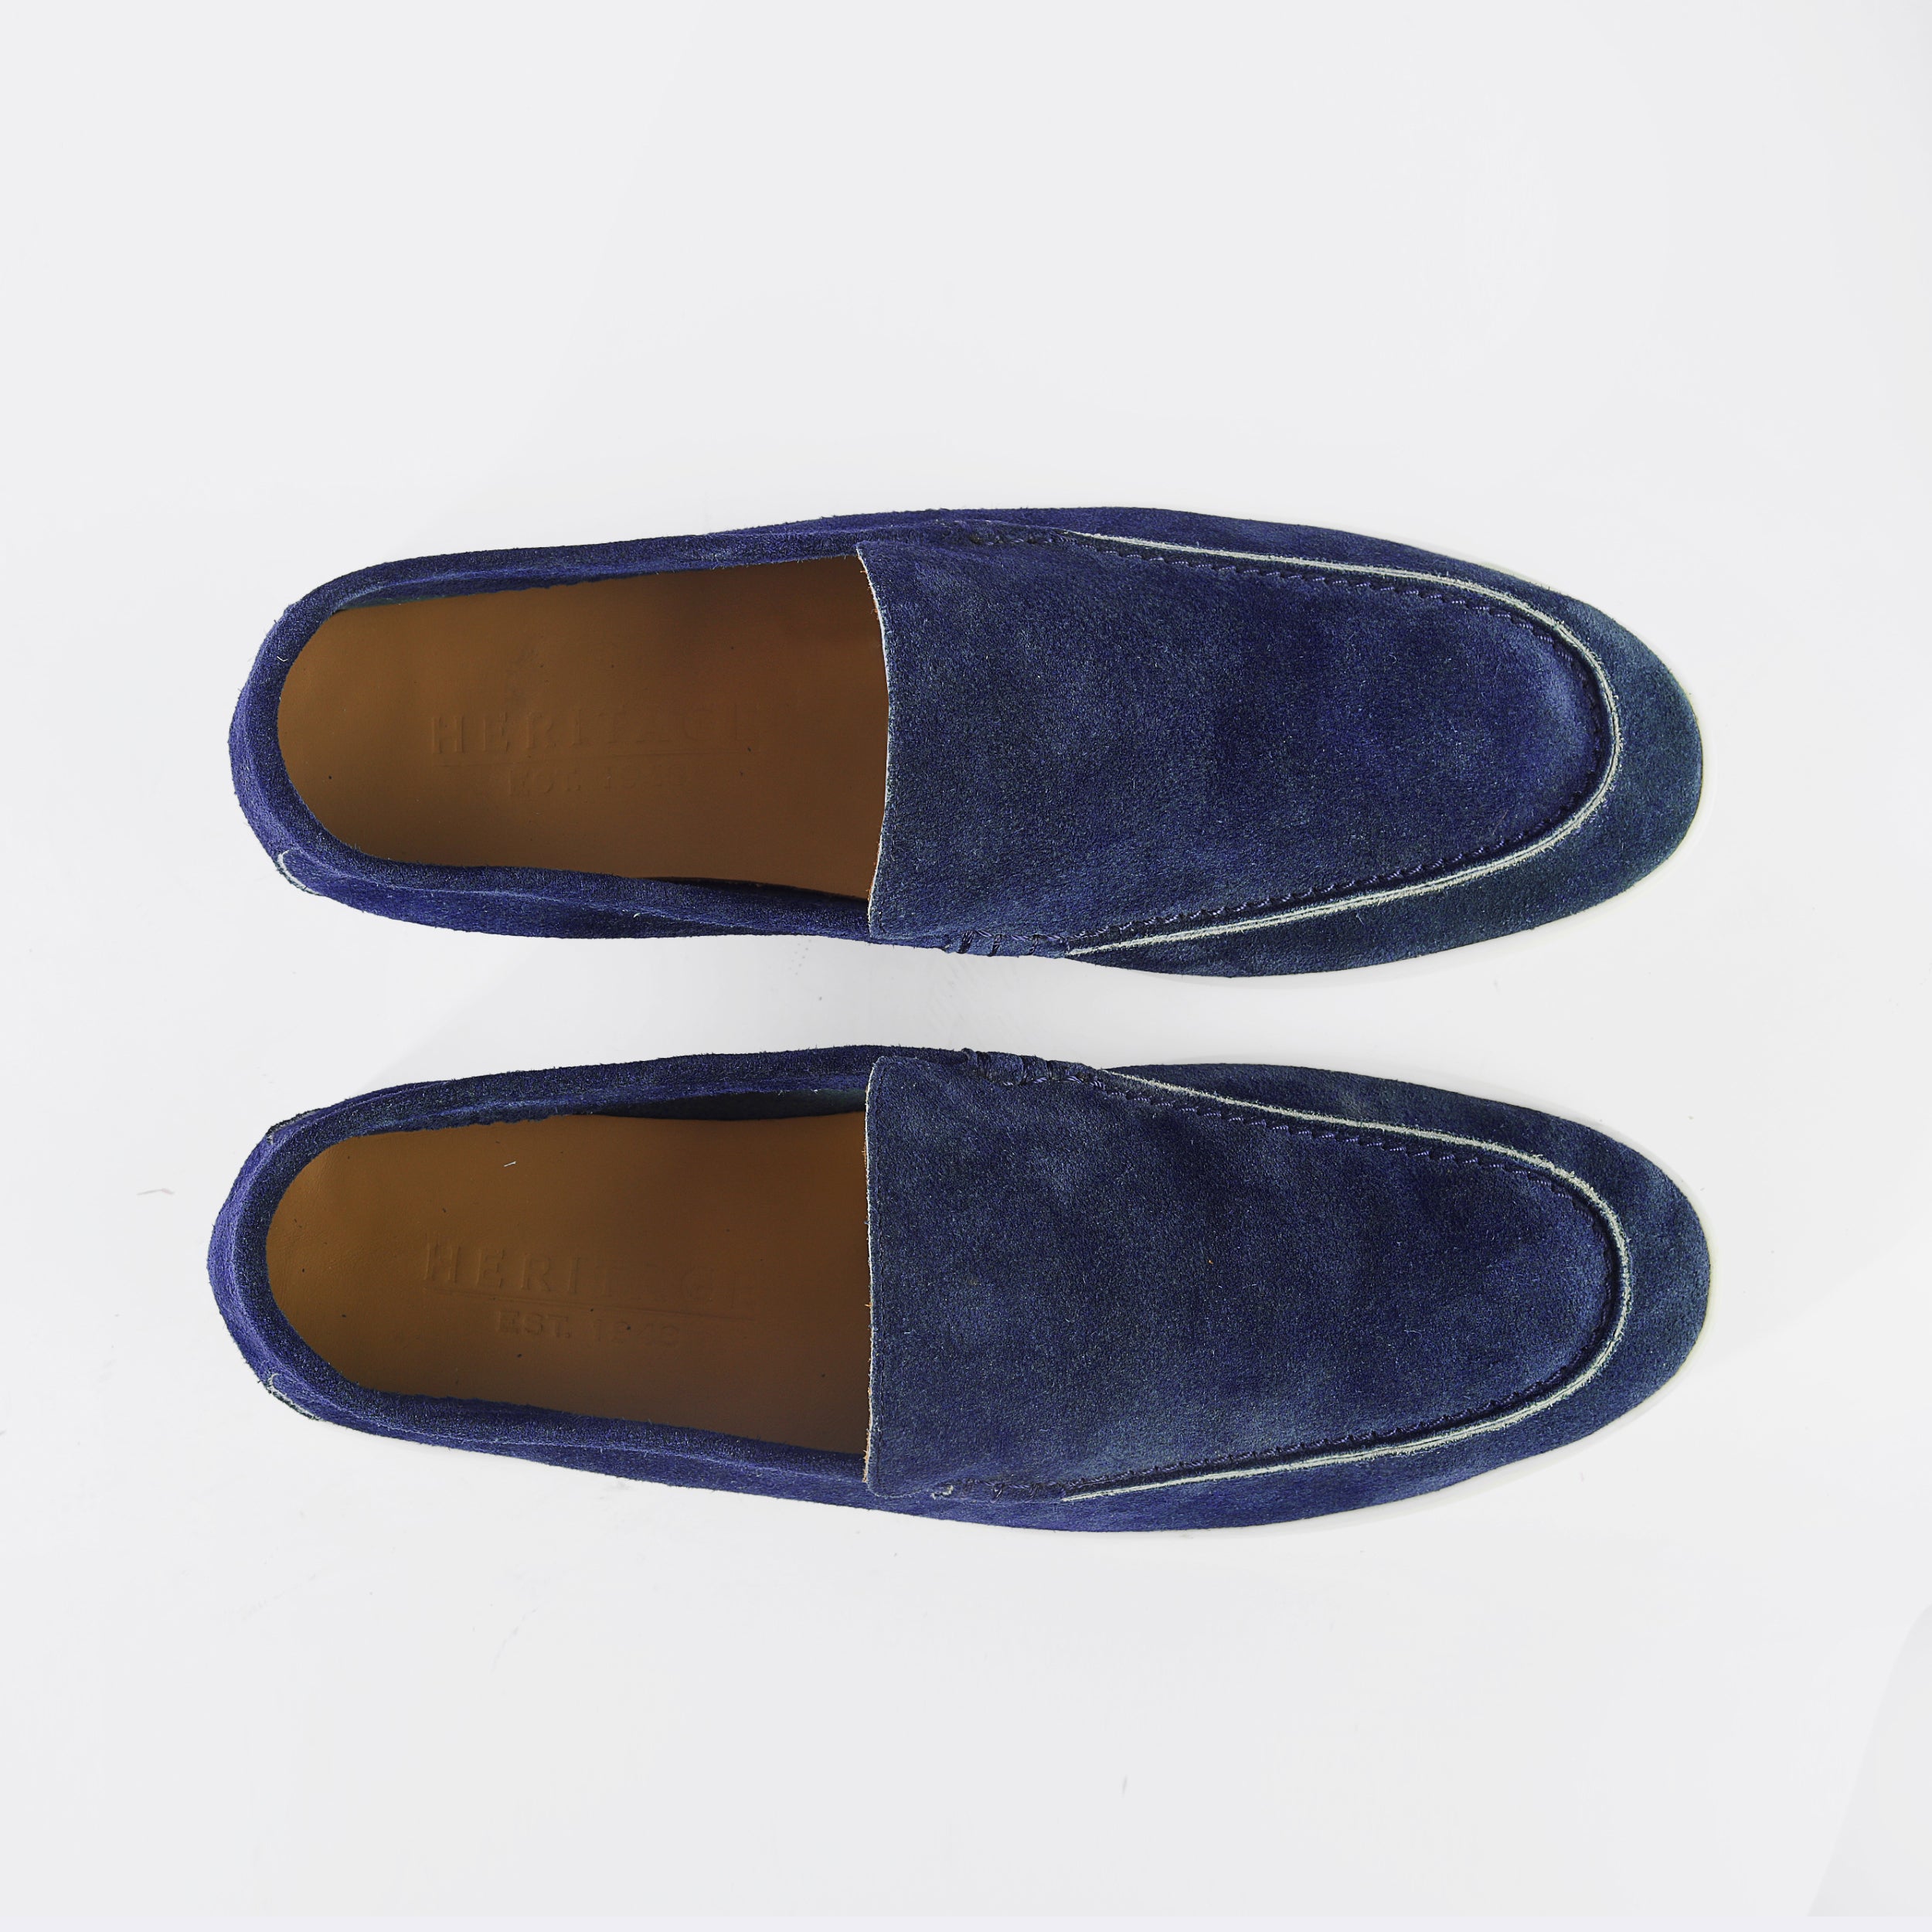 Heritage Suede Flat Loafers For Men Navy